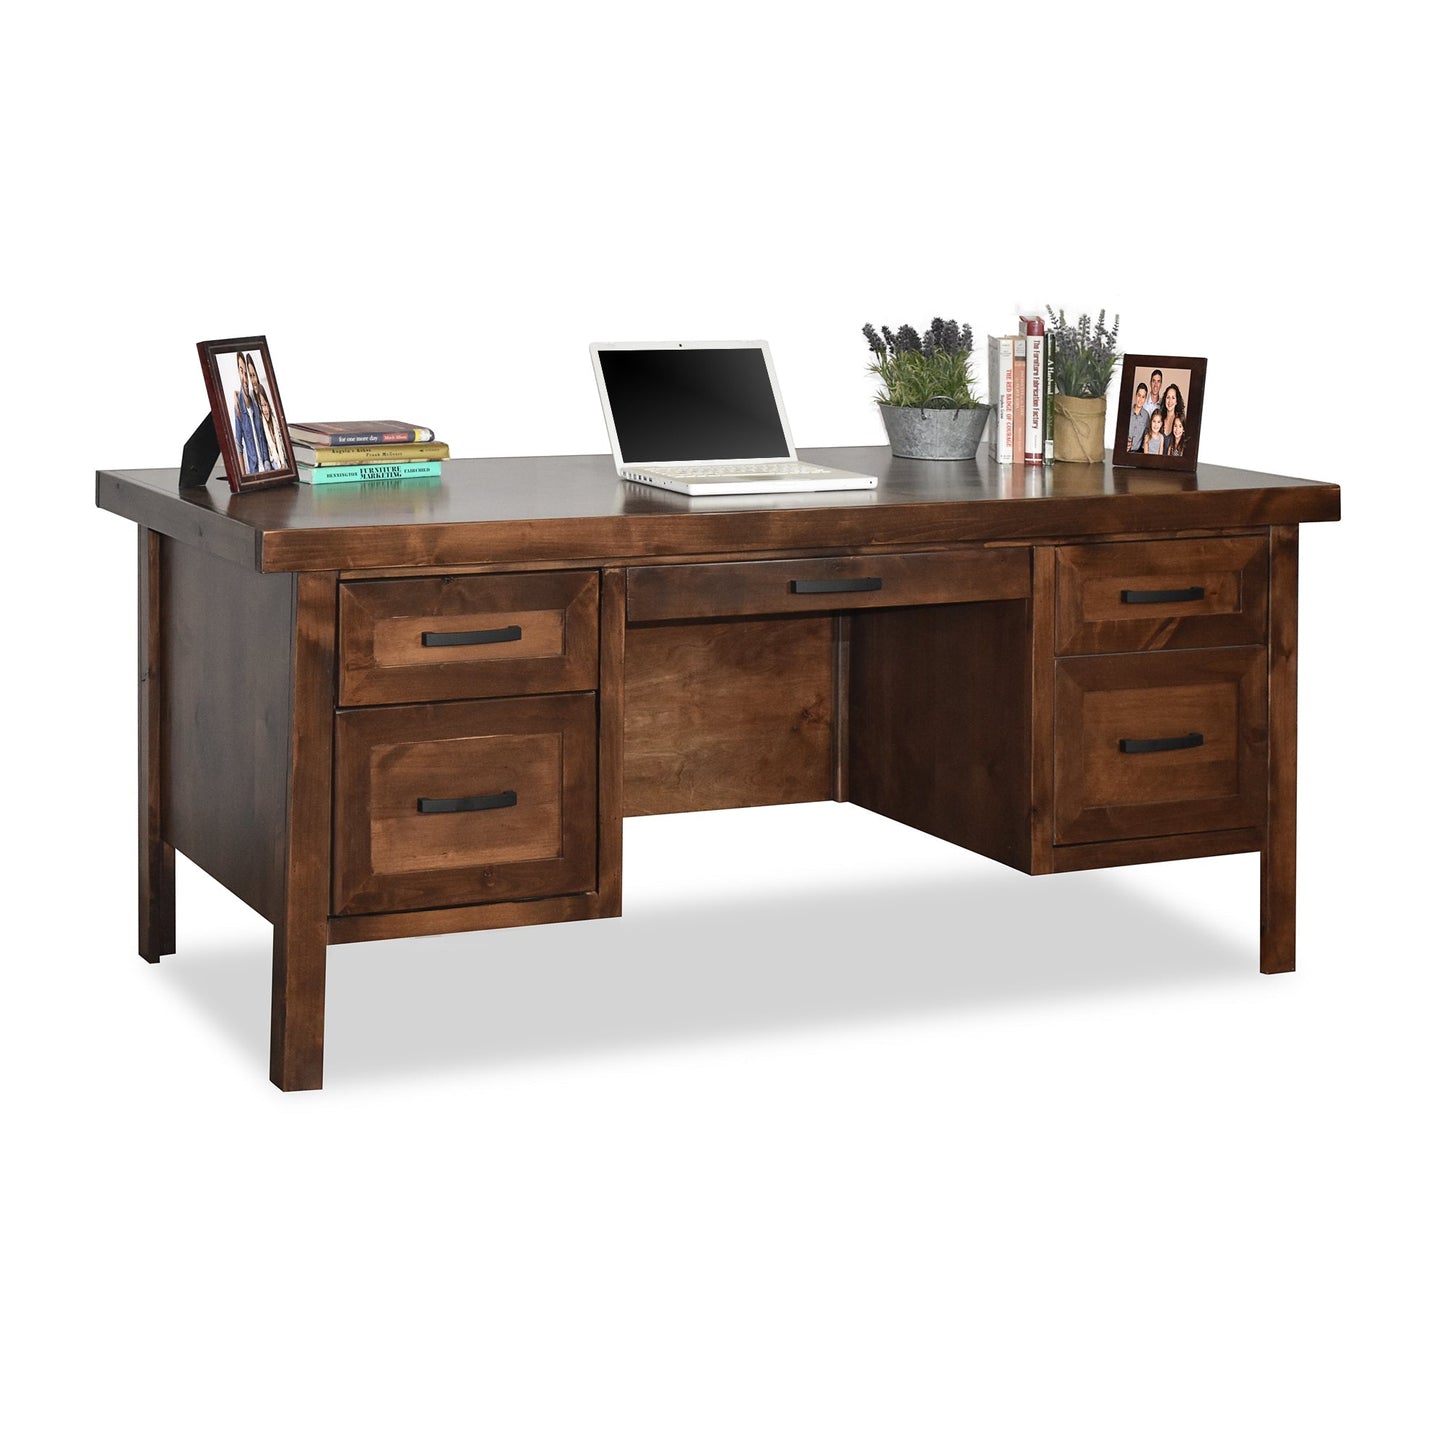 Bridgevine Home Sausalito 71 inch Executive Desk, No Assembly Required, Whiskey Finish